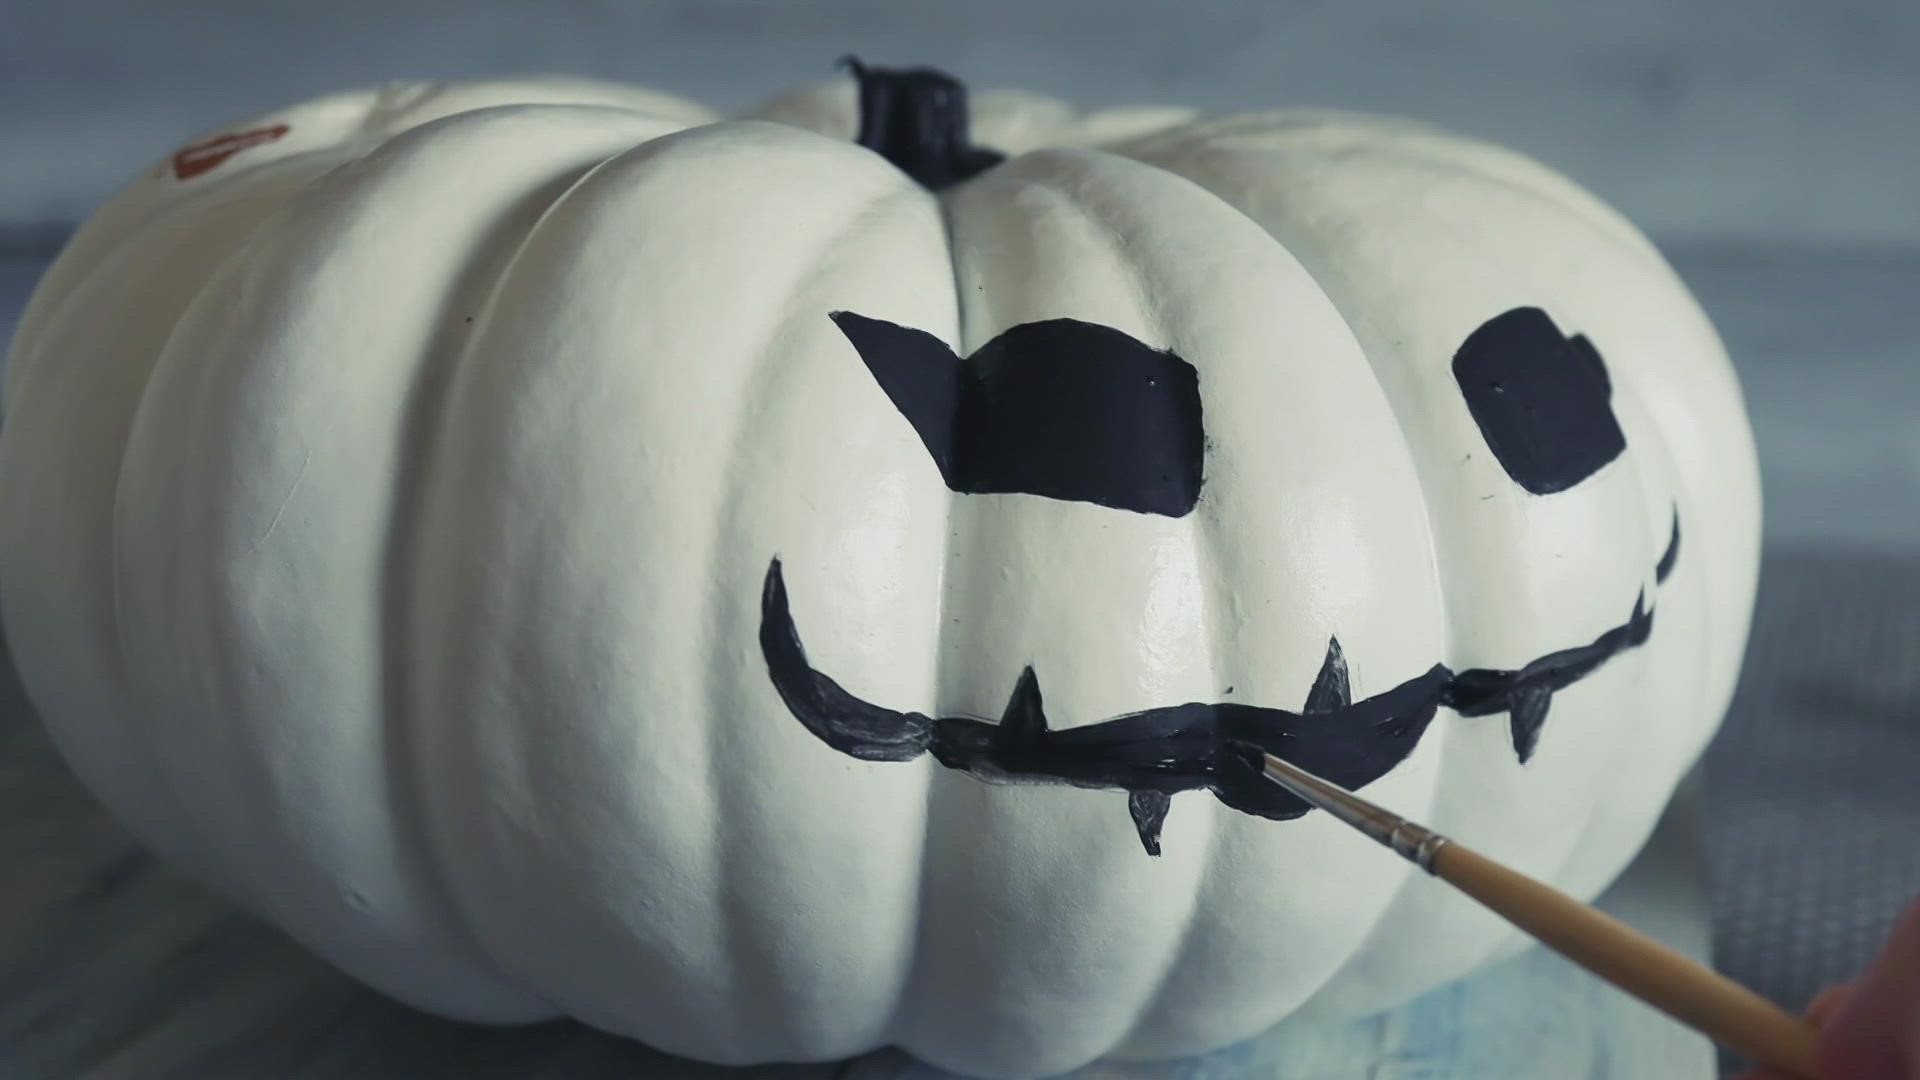 It's not a myth. Smearing petroleum jelly on your jack-o'-lantern helps it stay fresh longer.